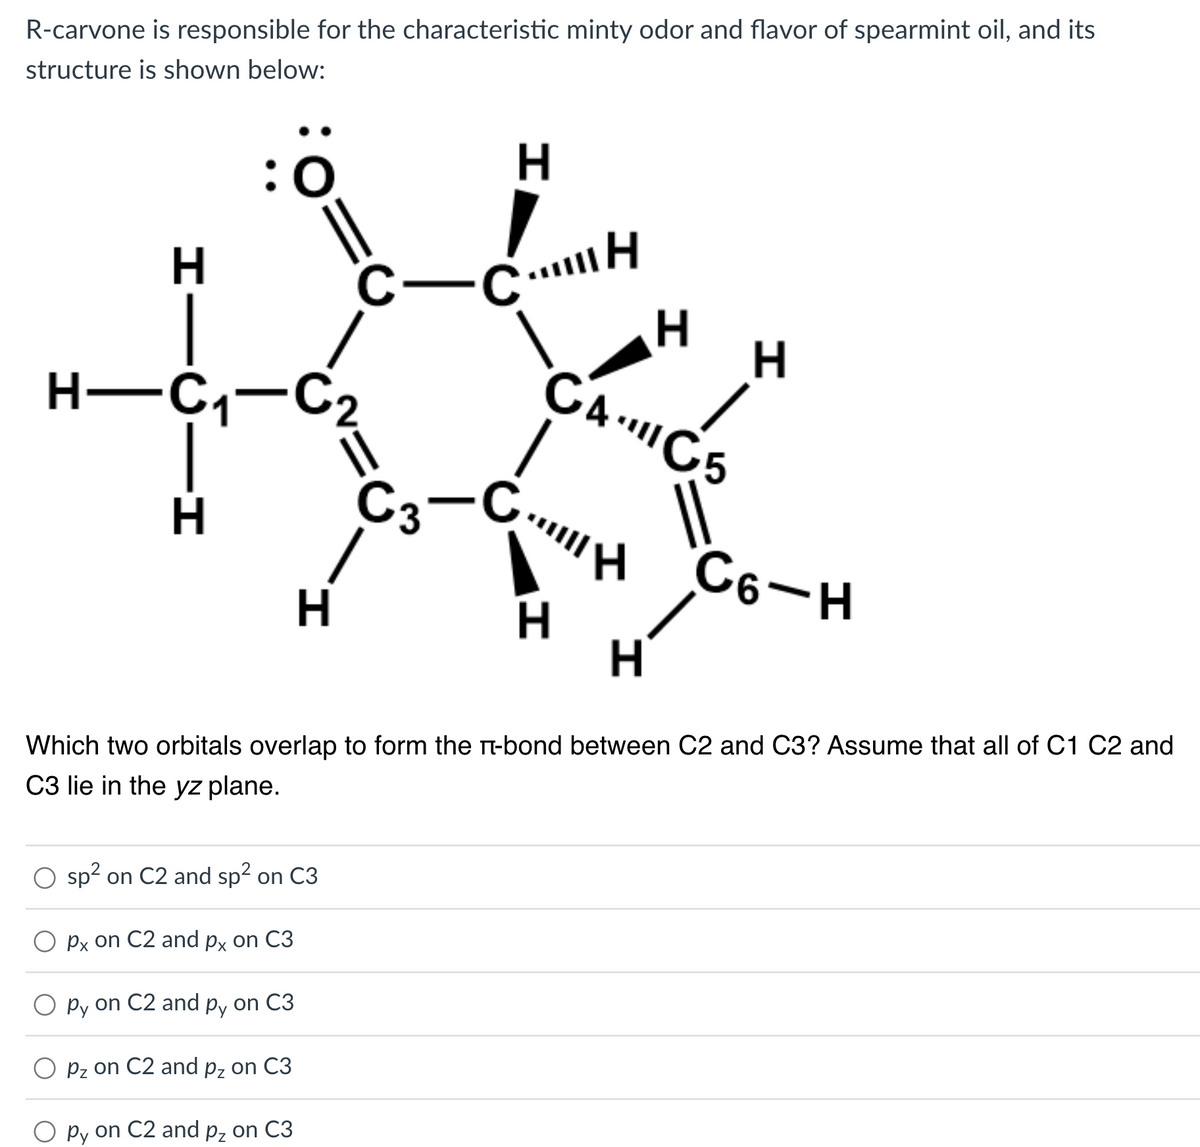 R-carvone is responsible for the characteristic minty odor and flavor of spearmint oil, and its
structure is shown below:
H
H-C₁-C₂
1-ن.
H
C-CH
sp² on C2 and sp² on C3
px on C2 and px on C3
O py on C2 and py on C3
Pz on C2 and pz on C3
py on C2 and p₂ on C3
C3-
1
H
H
H
CAC5
CH
H
H
H
Which two orbitals overlap to form the T-bond between C2 and C3? Assume that all of C1 C2 and
C3 lie in the yz plane.
C6-H